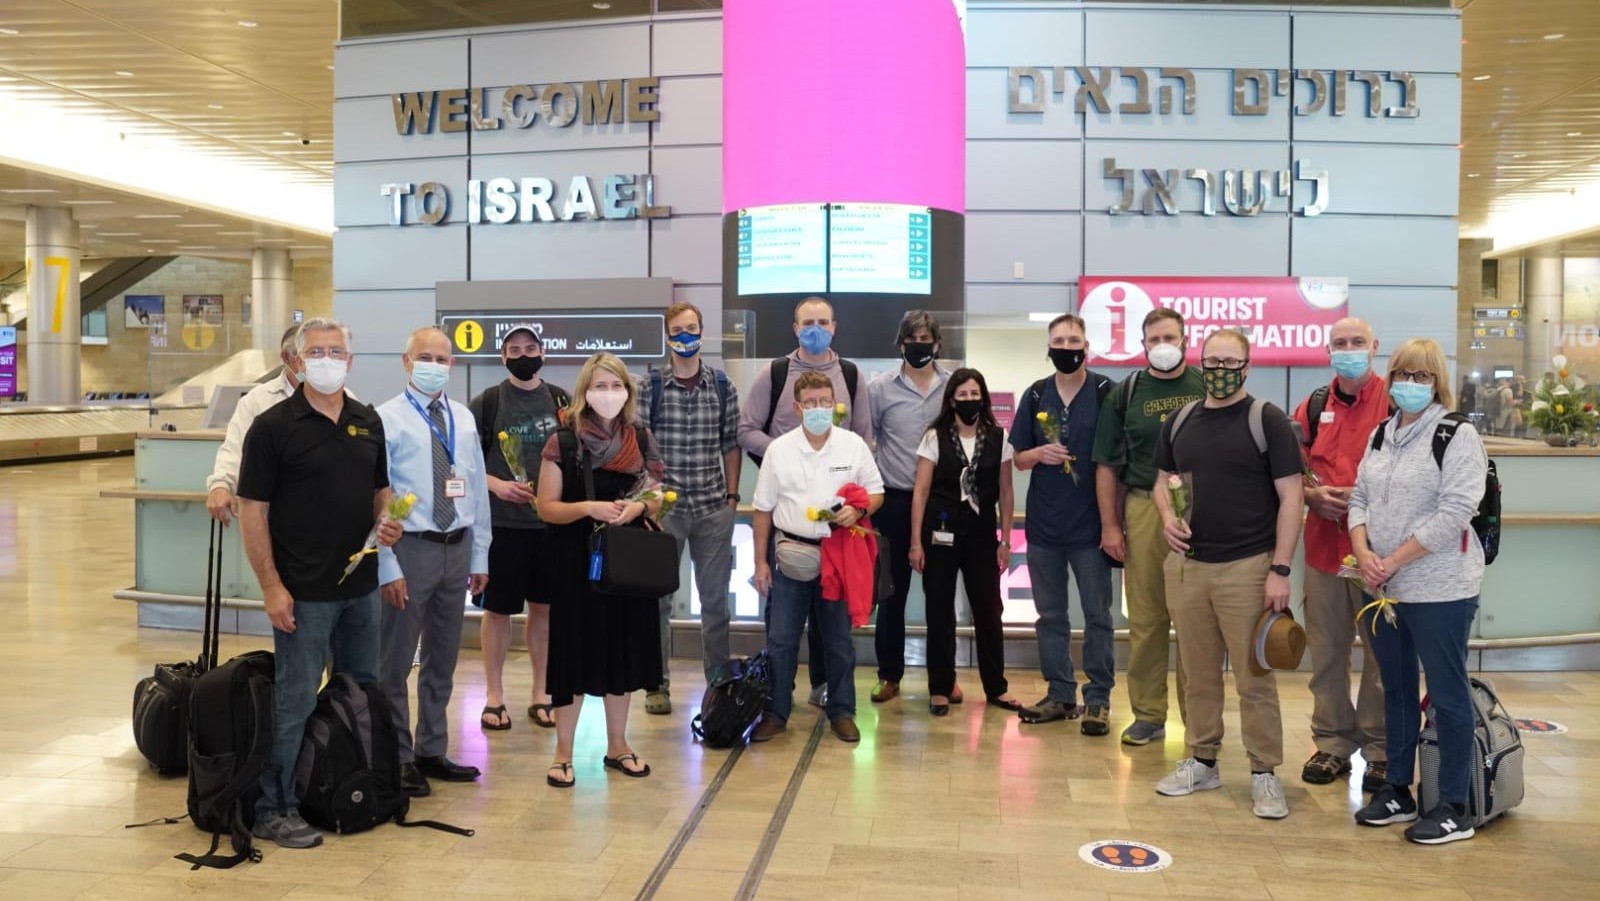 A group tour from Concordia Seminary in Missouri arrived in Israel on May 27, 2021. Photo by Michael Dimenstein/GPO